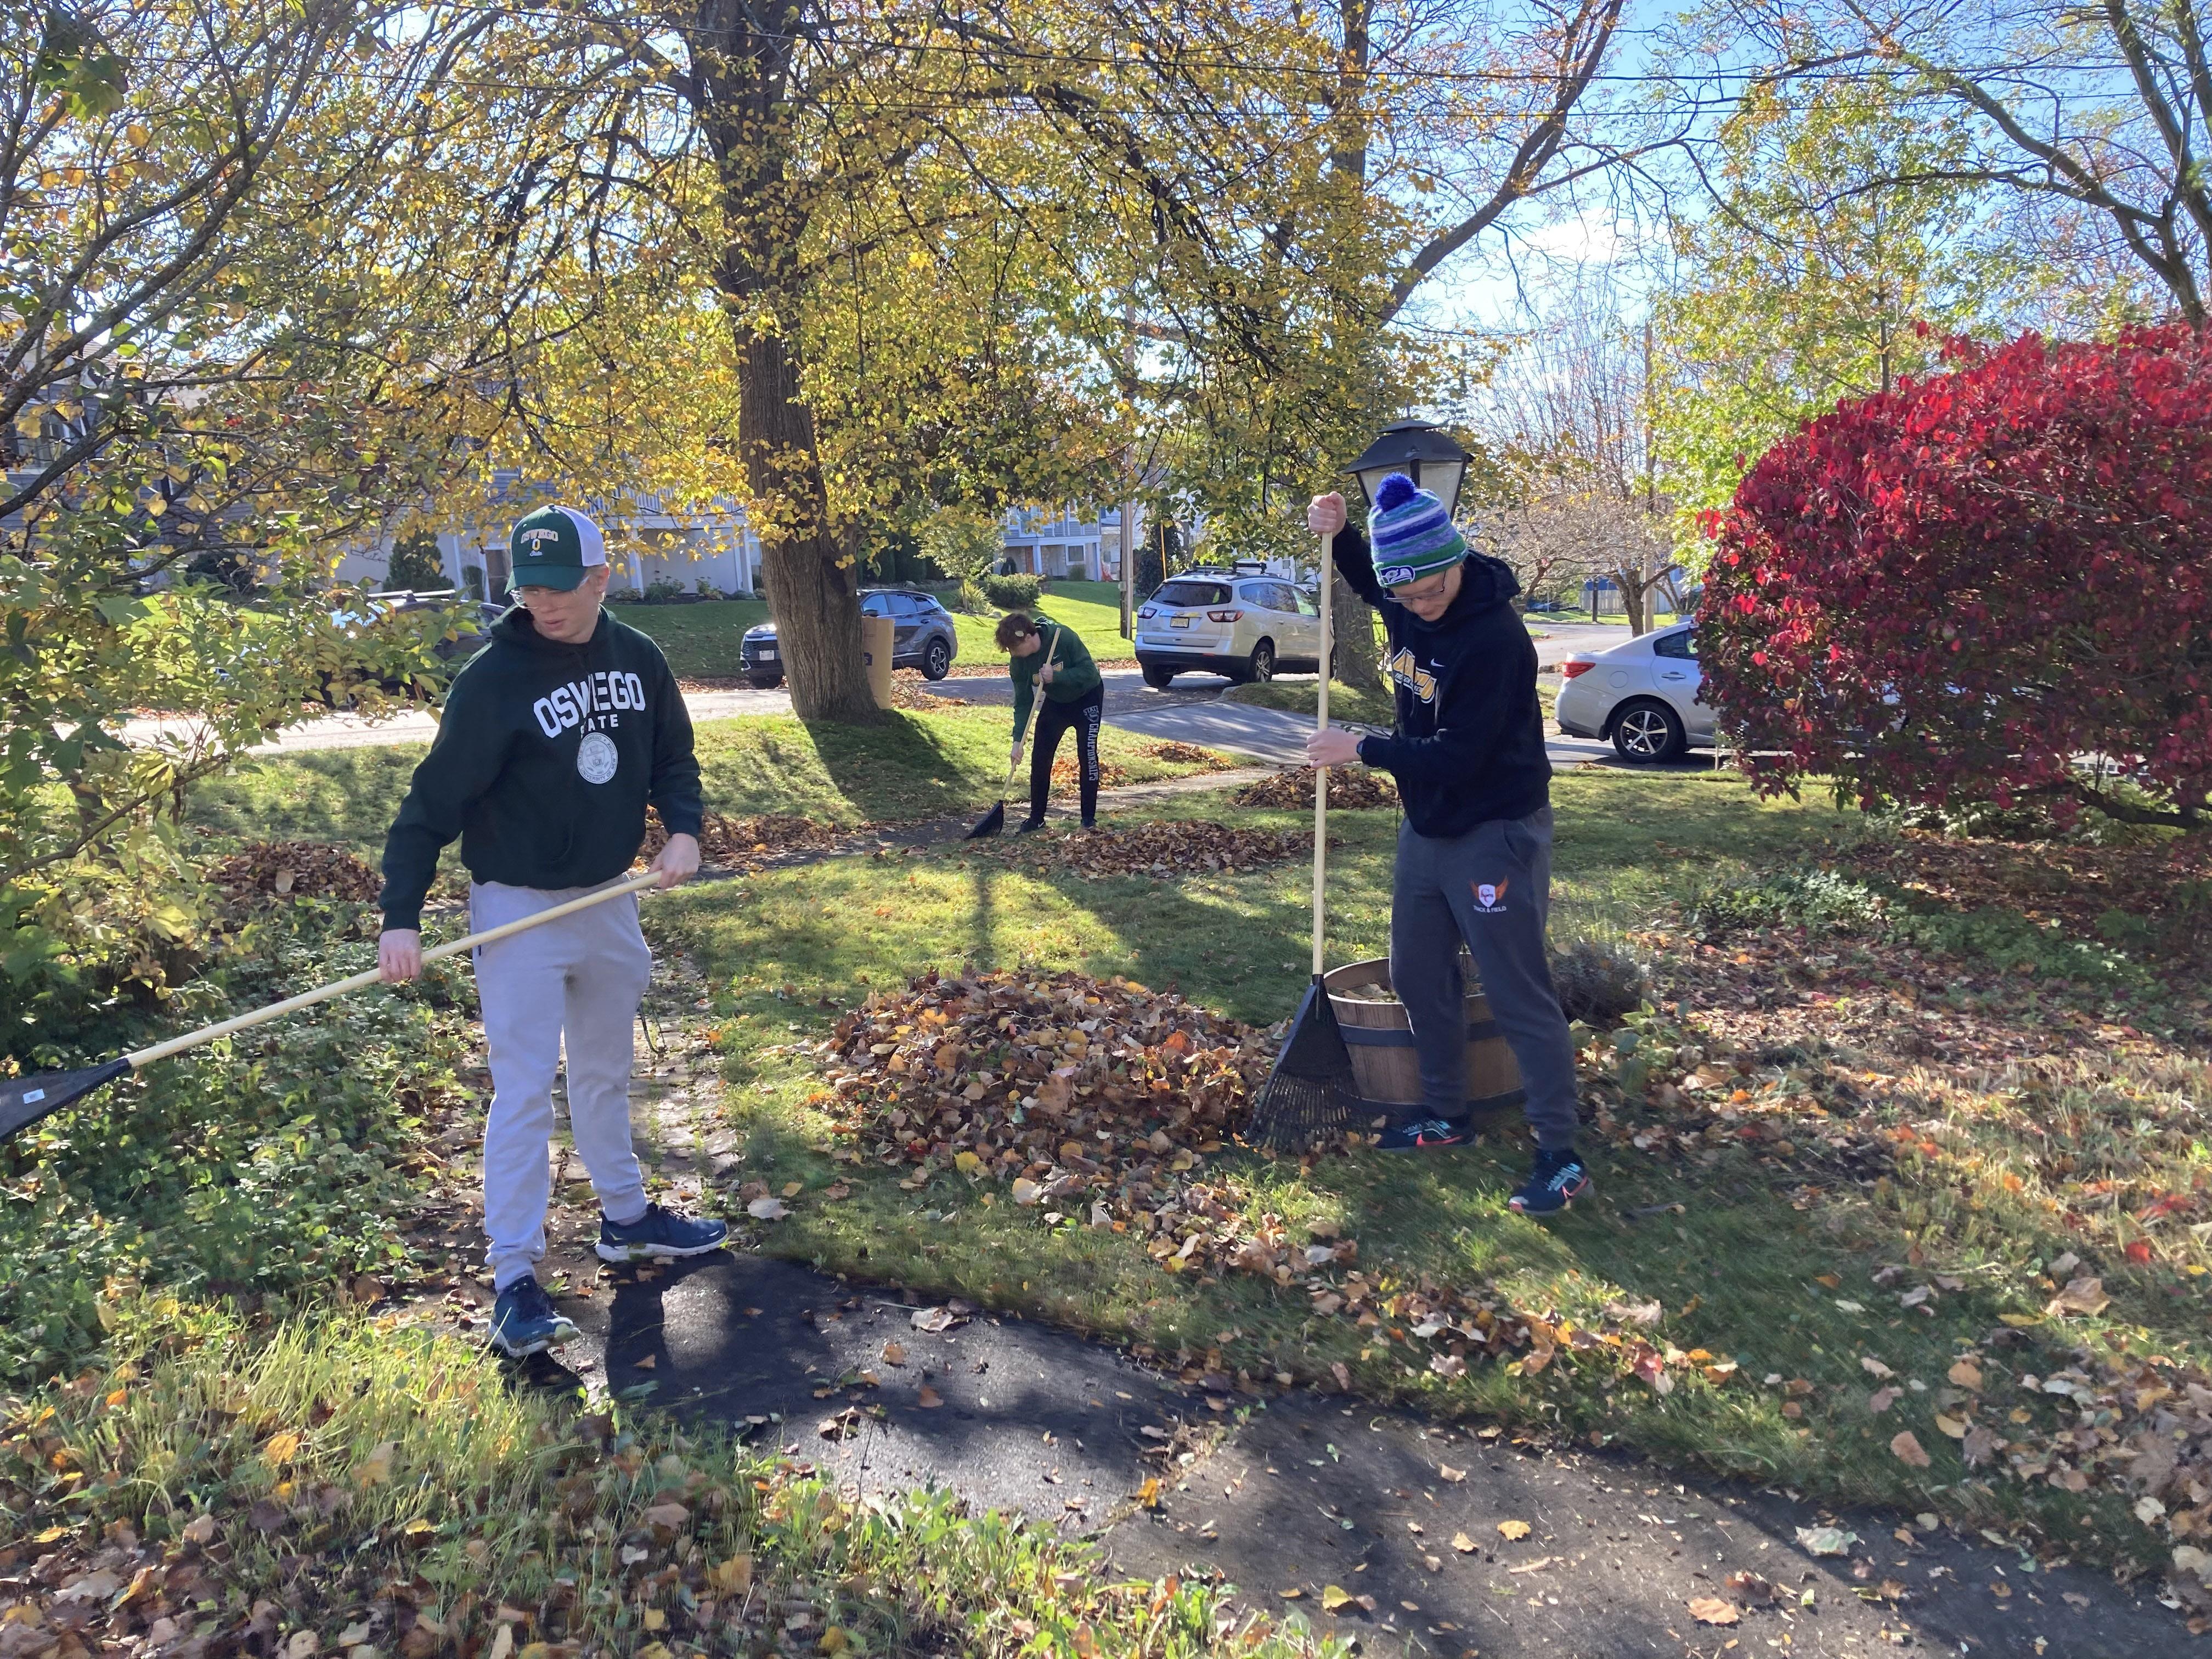 Track and field athletes rake a lawn in the community